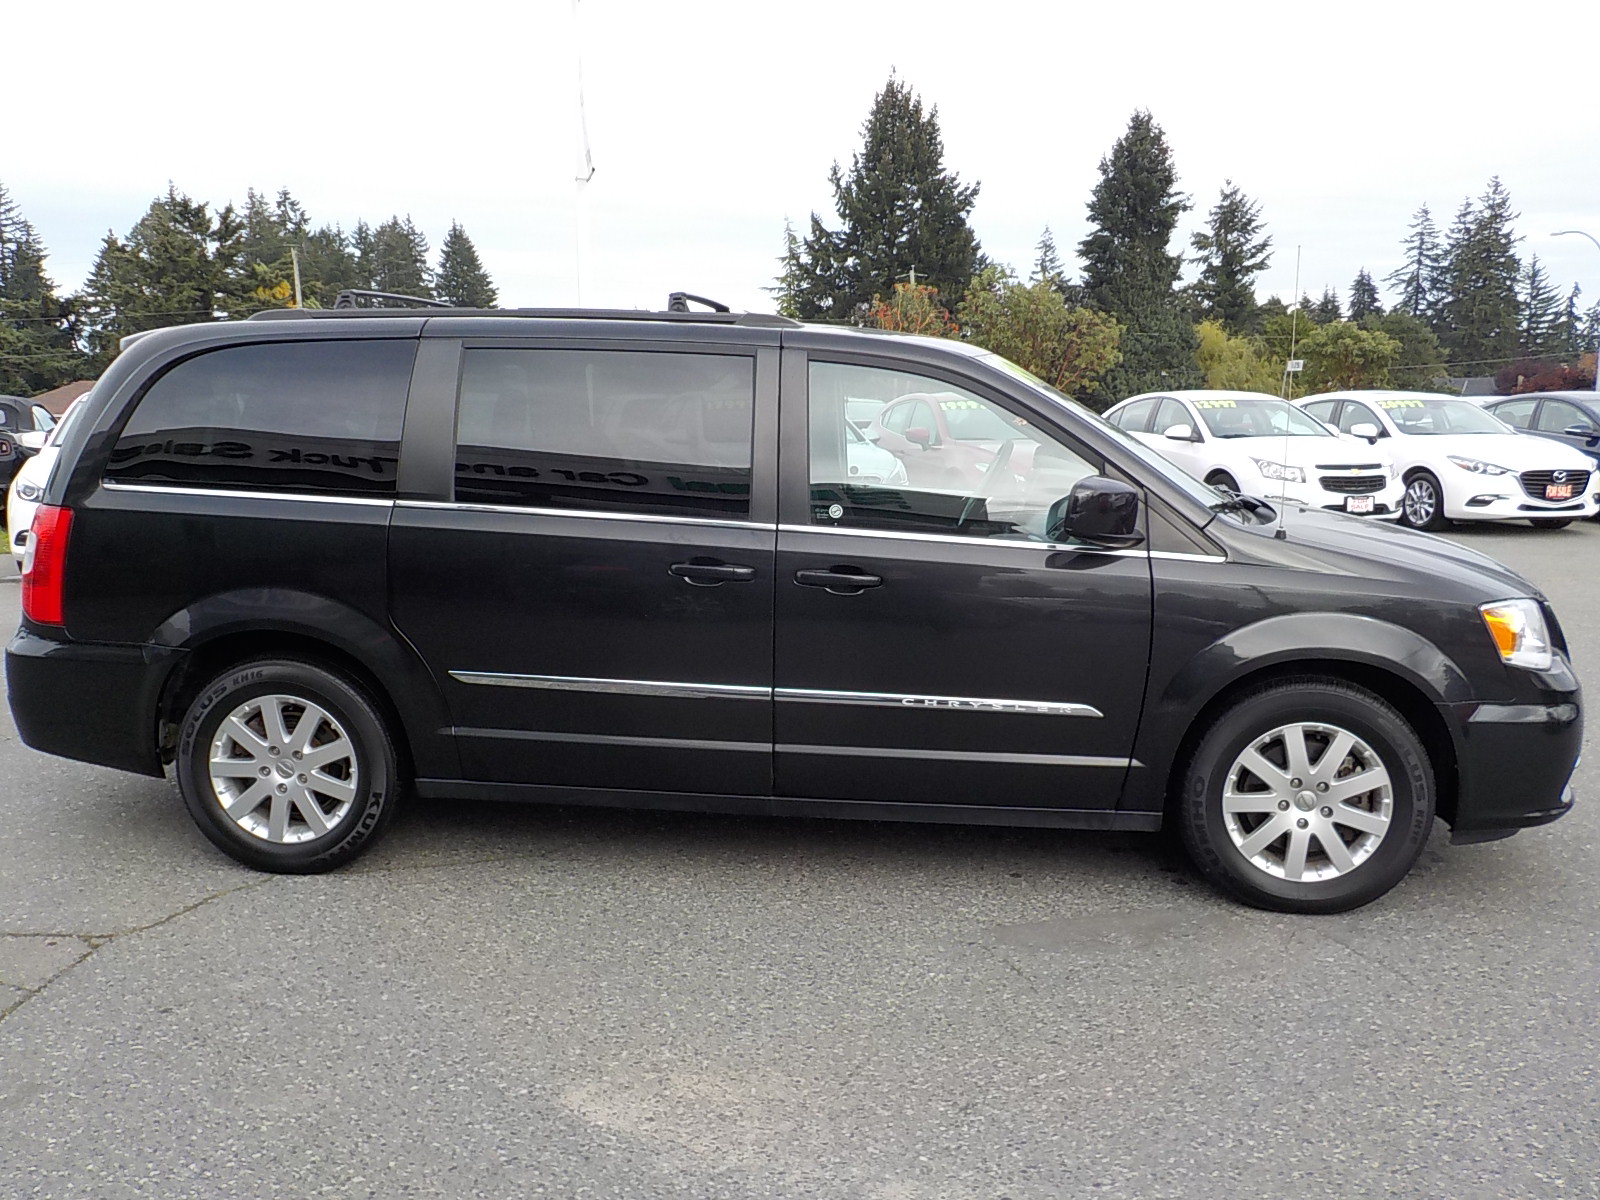 Used 2015 Chrysler Town and Country in Nanaimo,BC